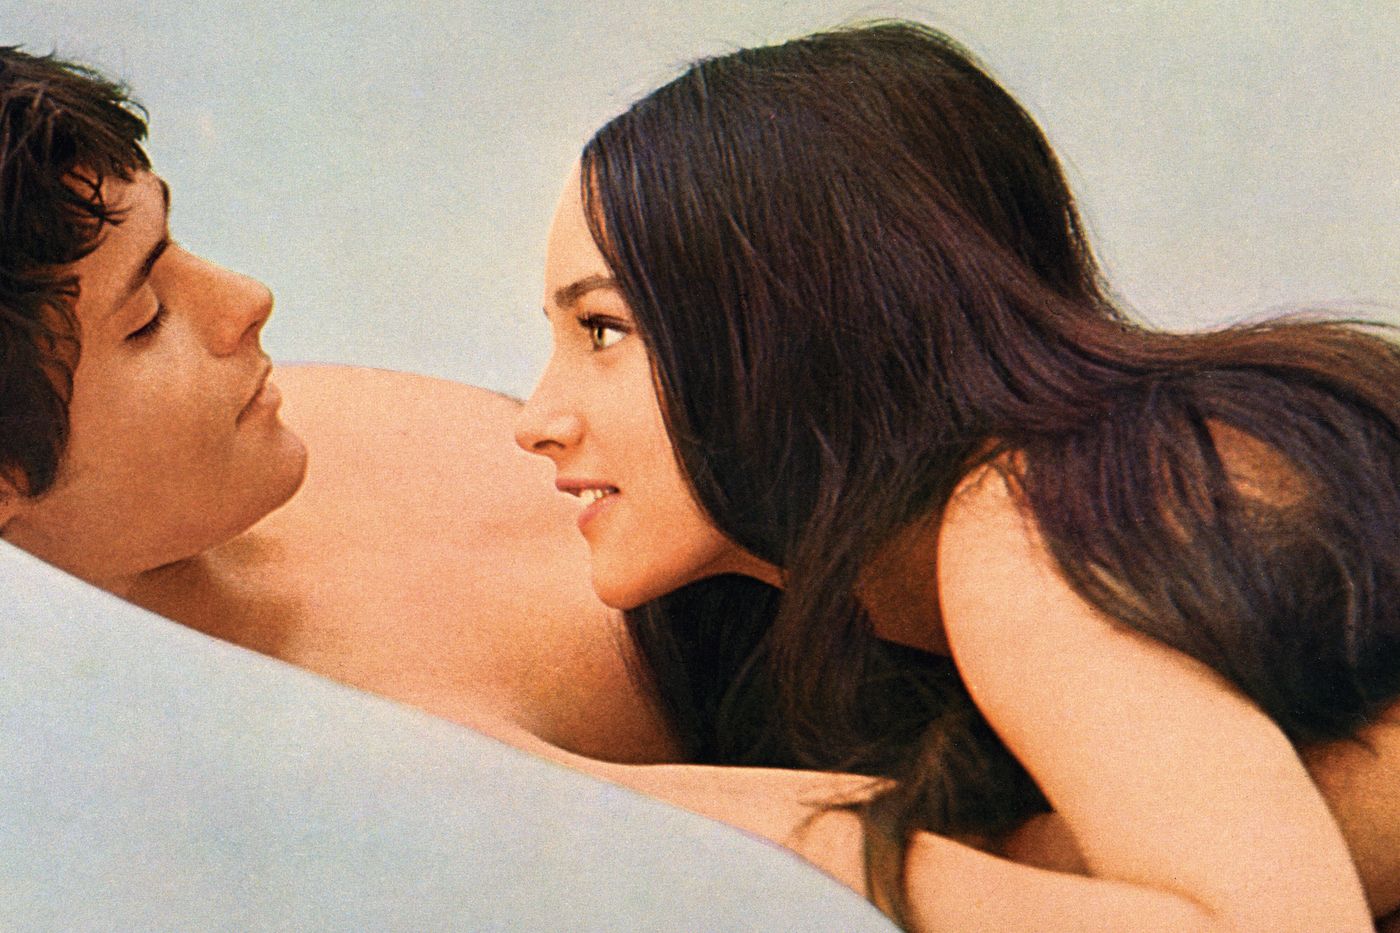 Xxx Hot Rep Wife Hasband - Olivia Hussey and Leonard Whiting's Romeo and Juliet Lawsuit